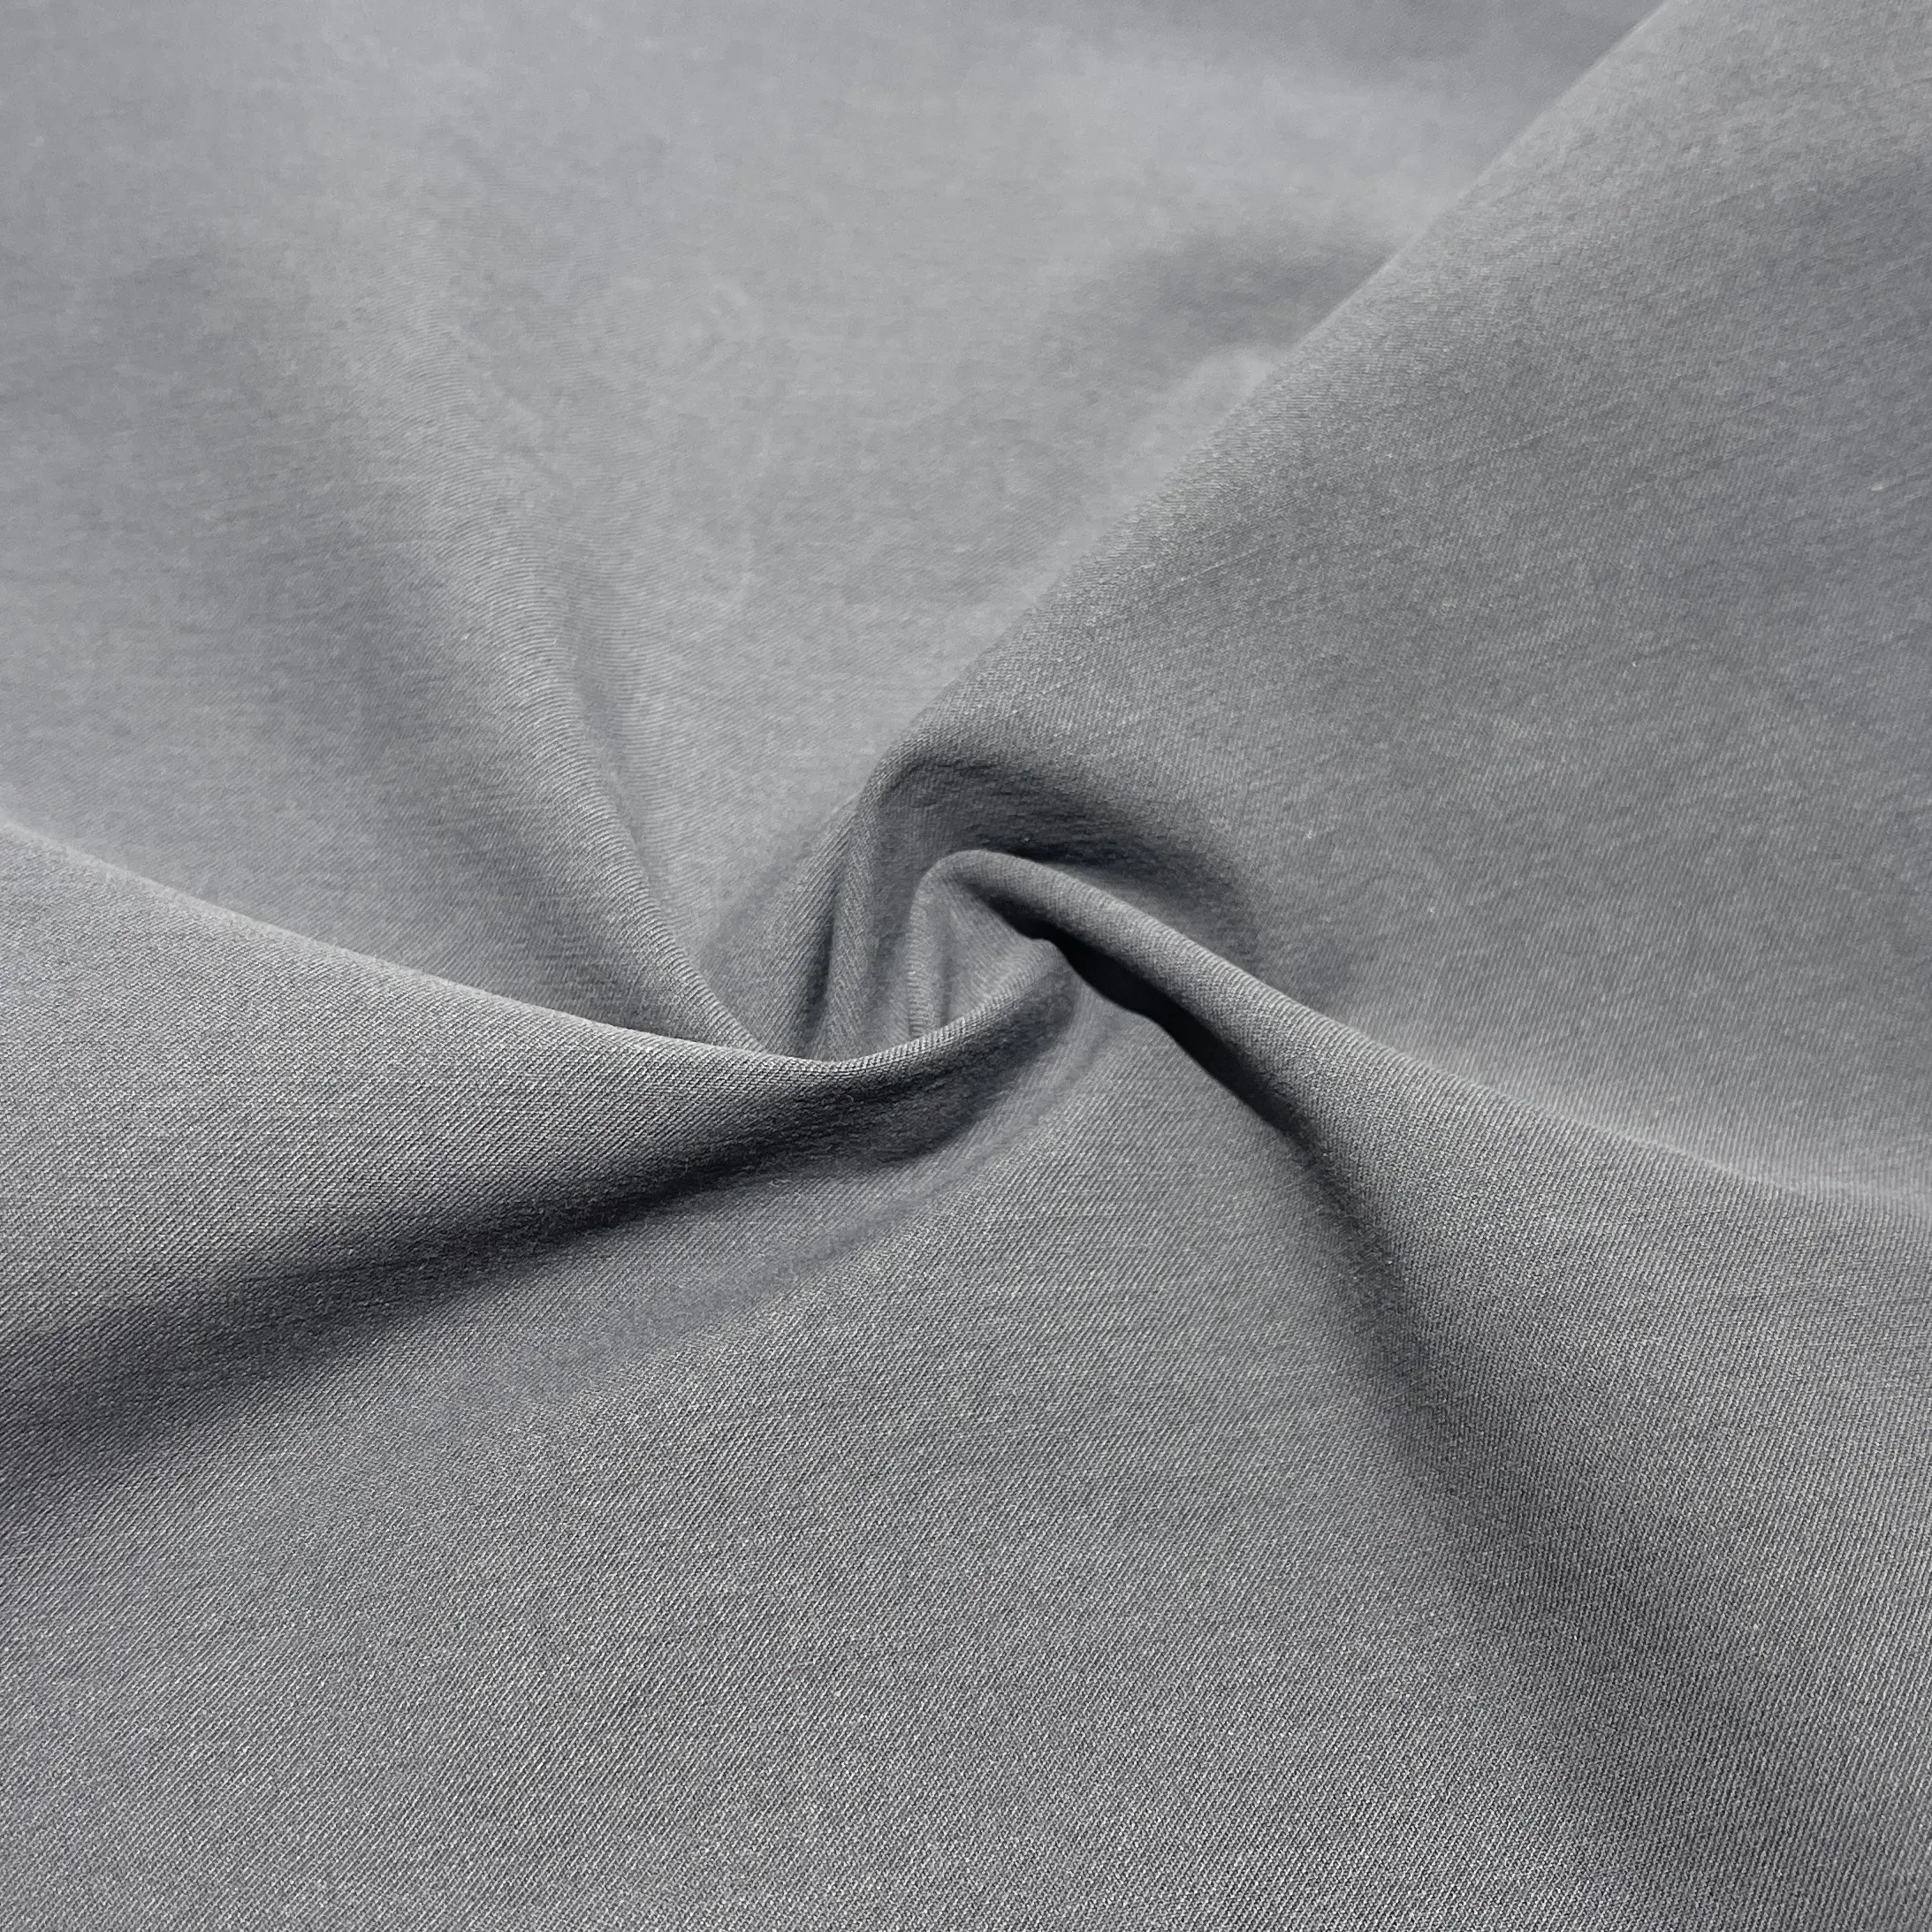 Wholesale Woven 57%Nylon 31%Cotton Four Way Spandex Fabrics with Water Resistant for Trousers